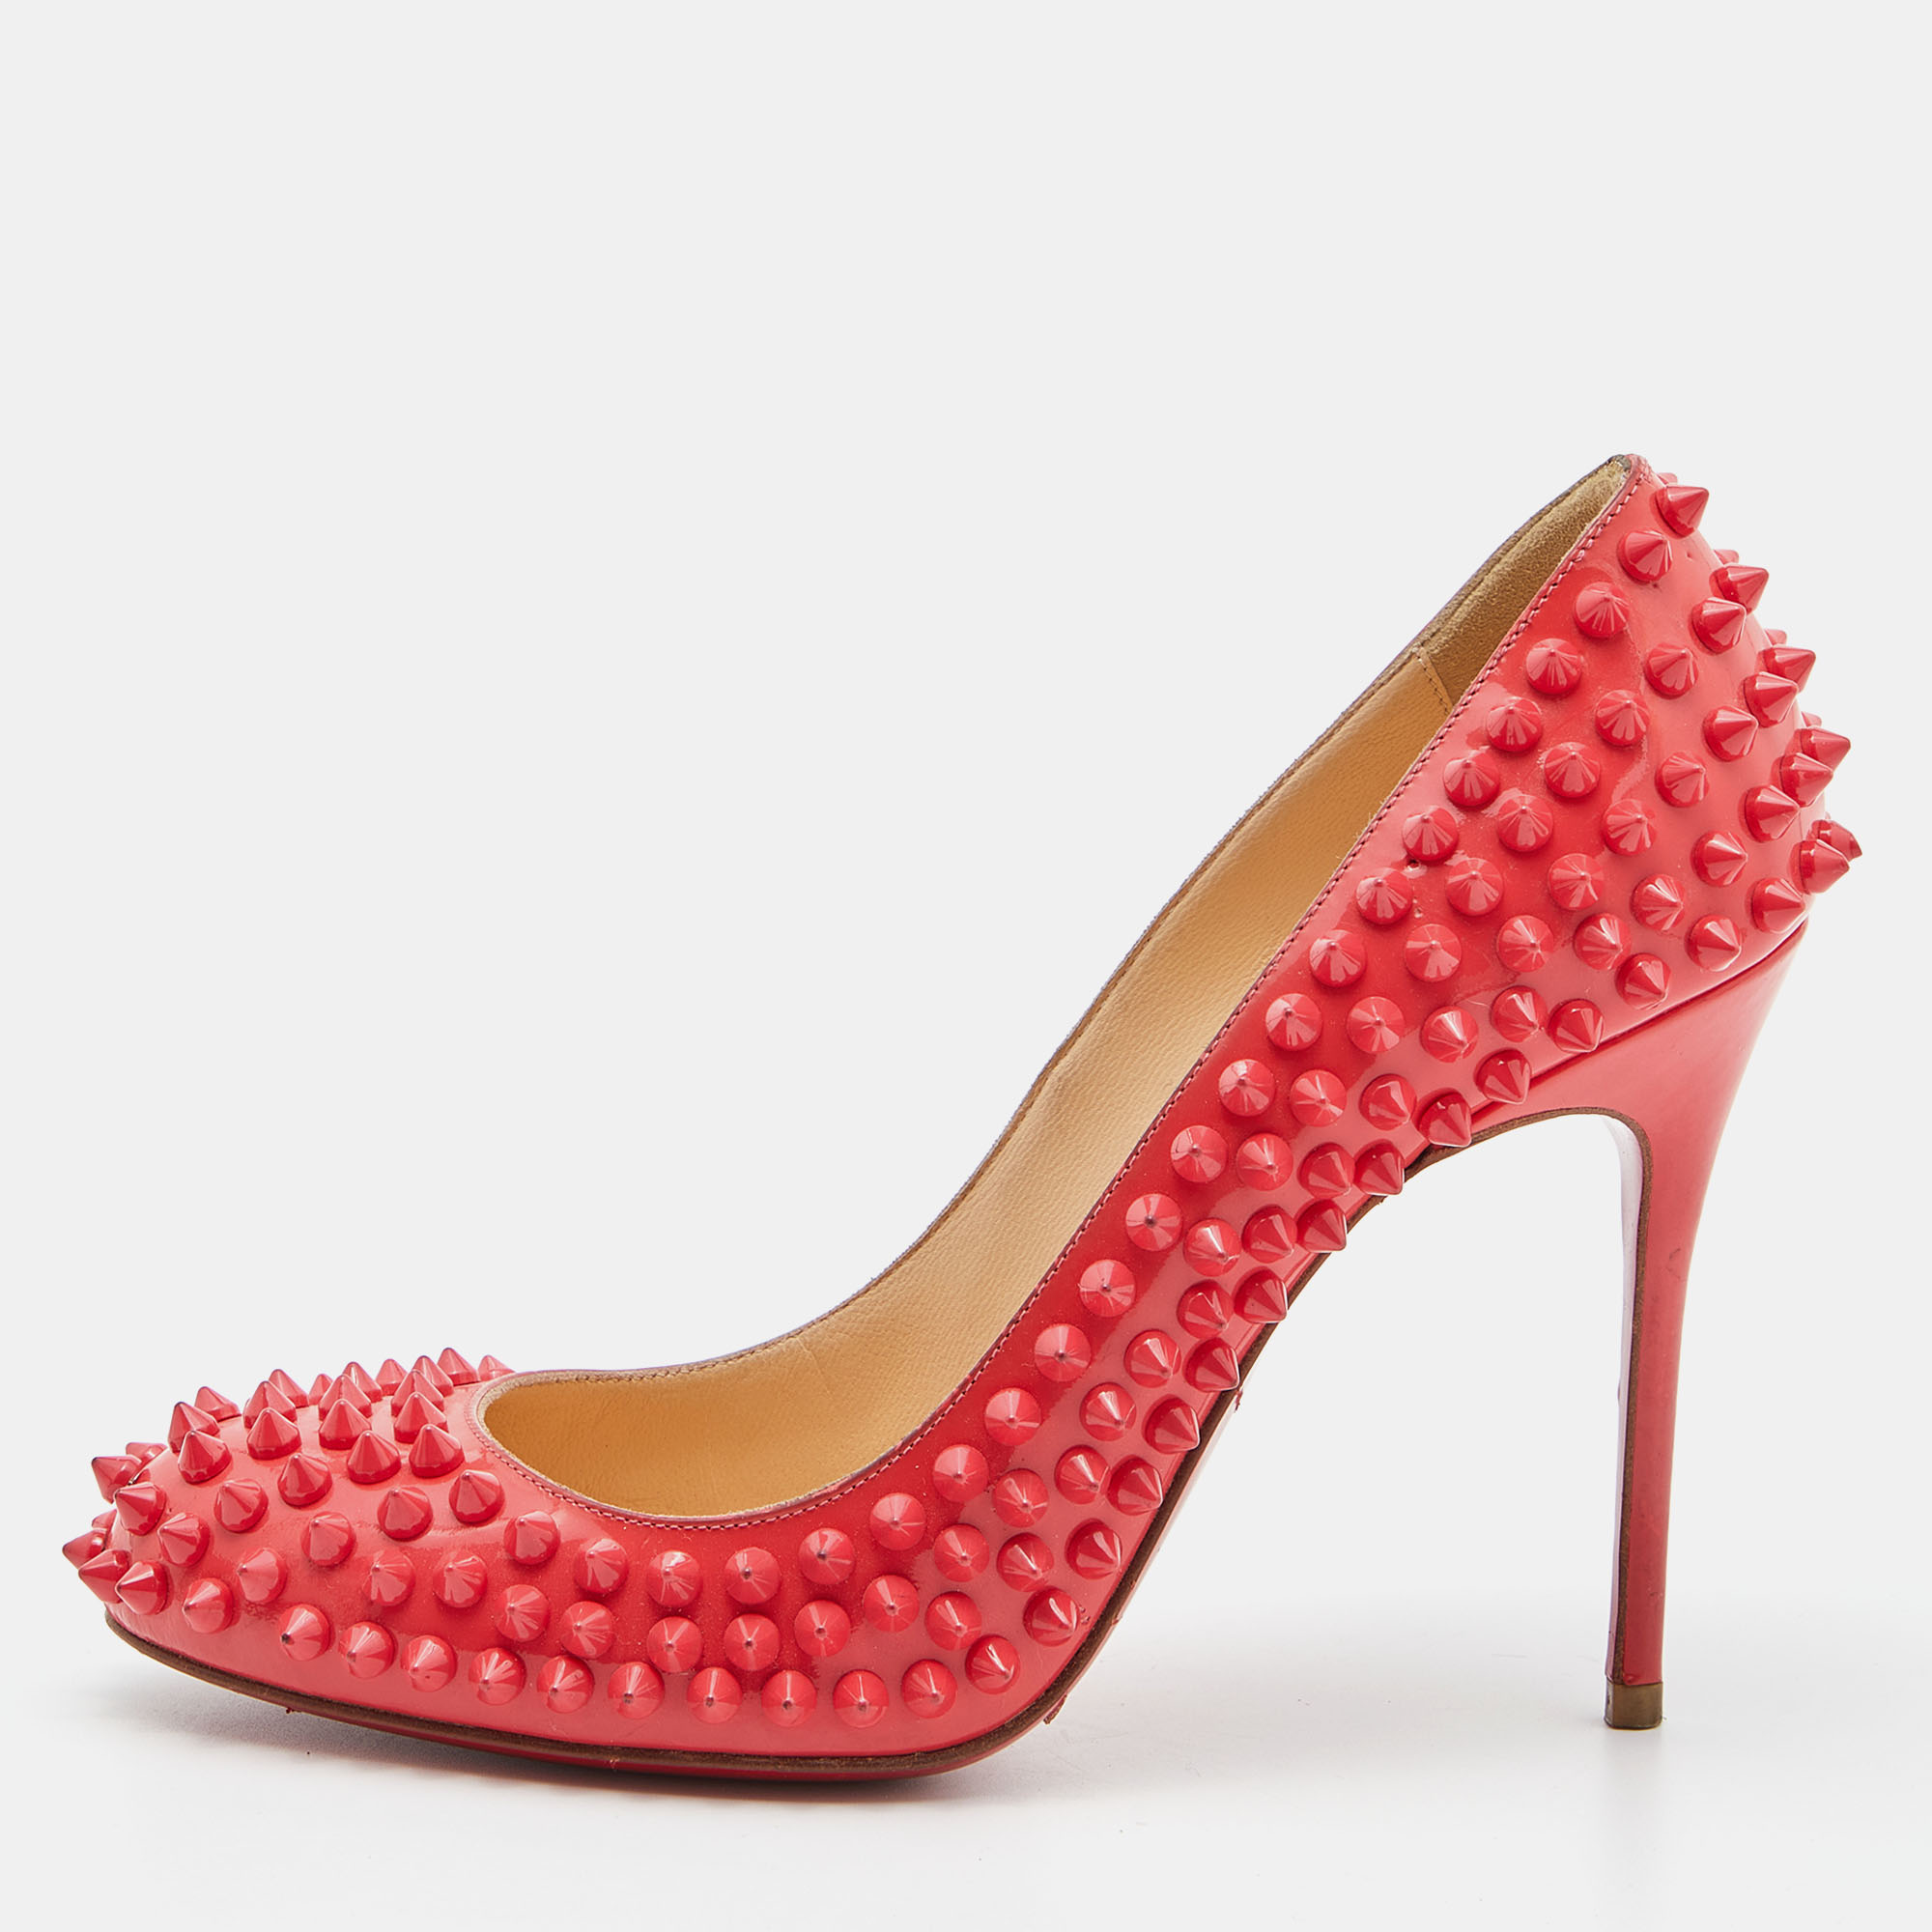 Christian Louboutin Coral Pink Patent Leather Fifi Spikes Pumps Size 36.5